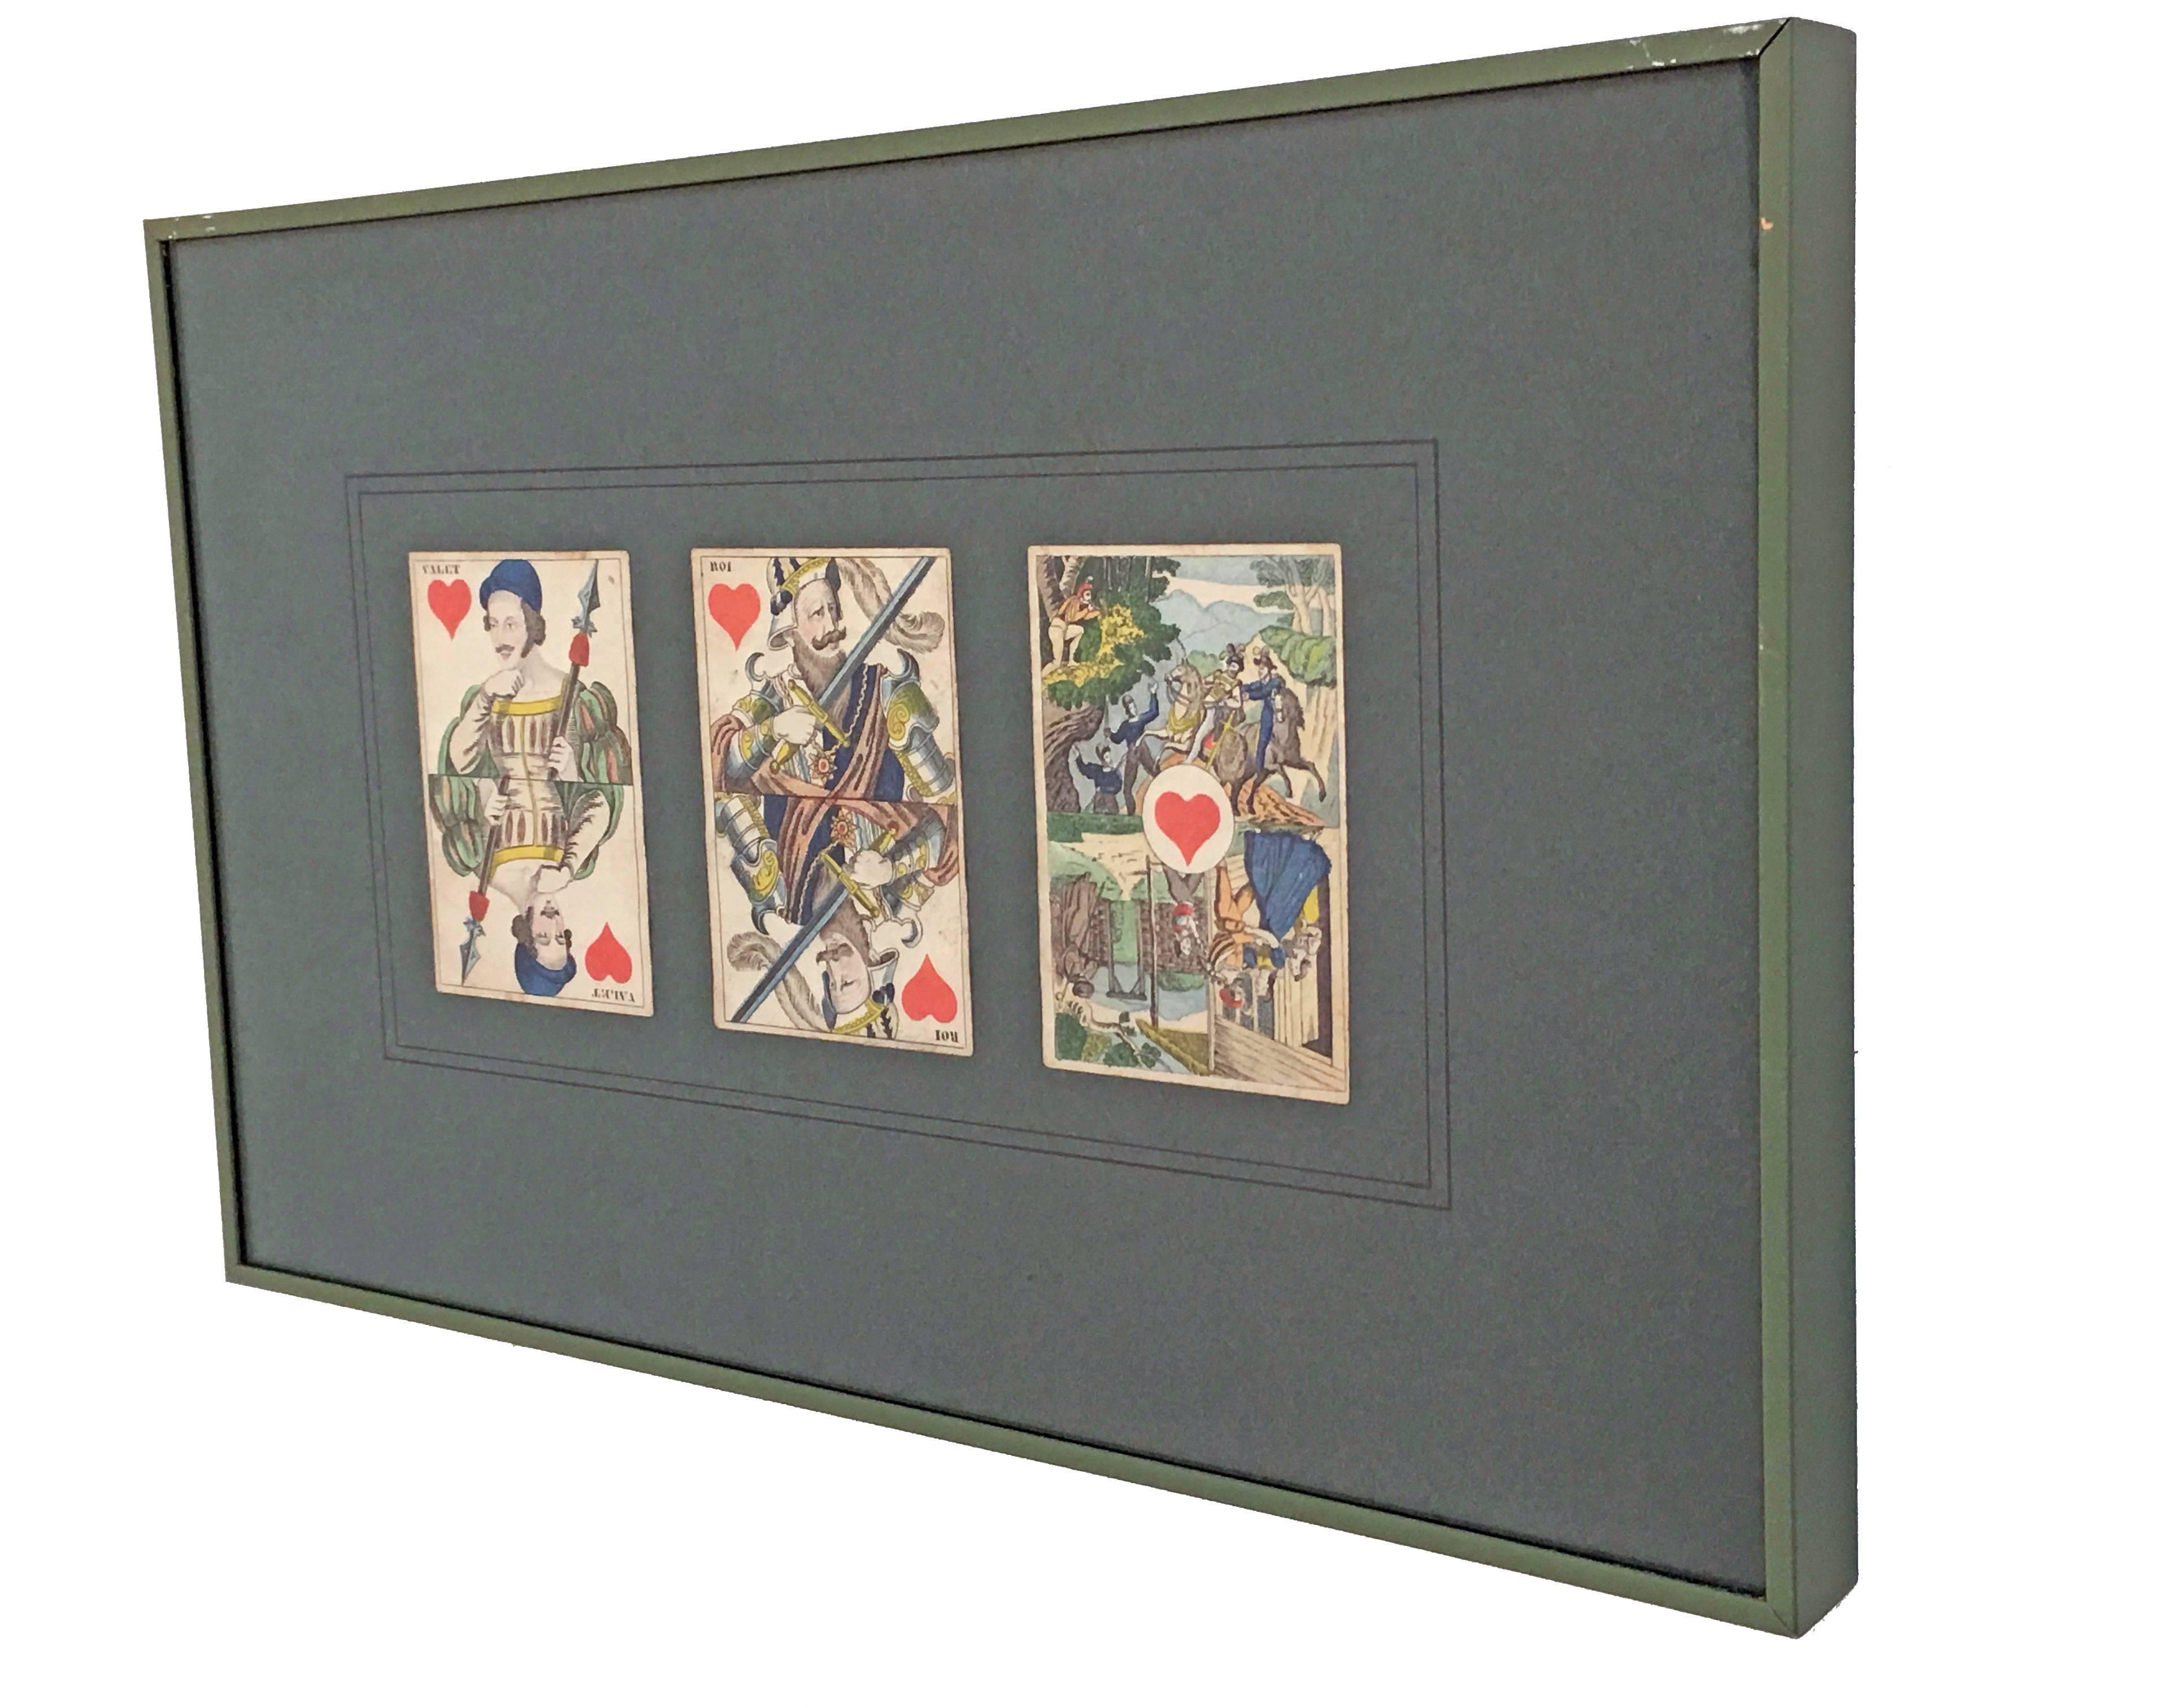 Paper Collection of 62 Piatnik Playing Cards, 13 Framed Pieces, Austrian, 19th Century